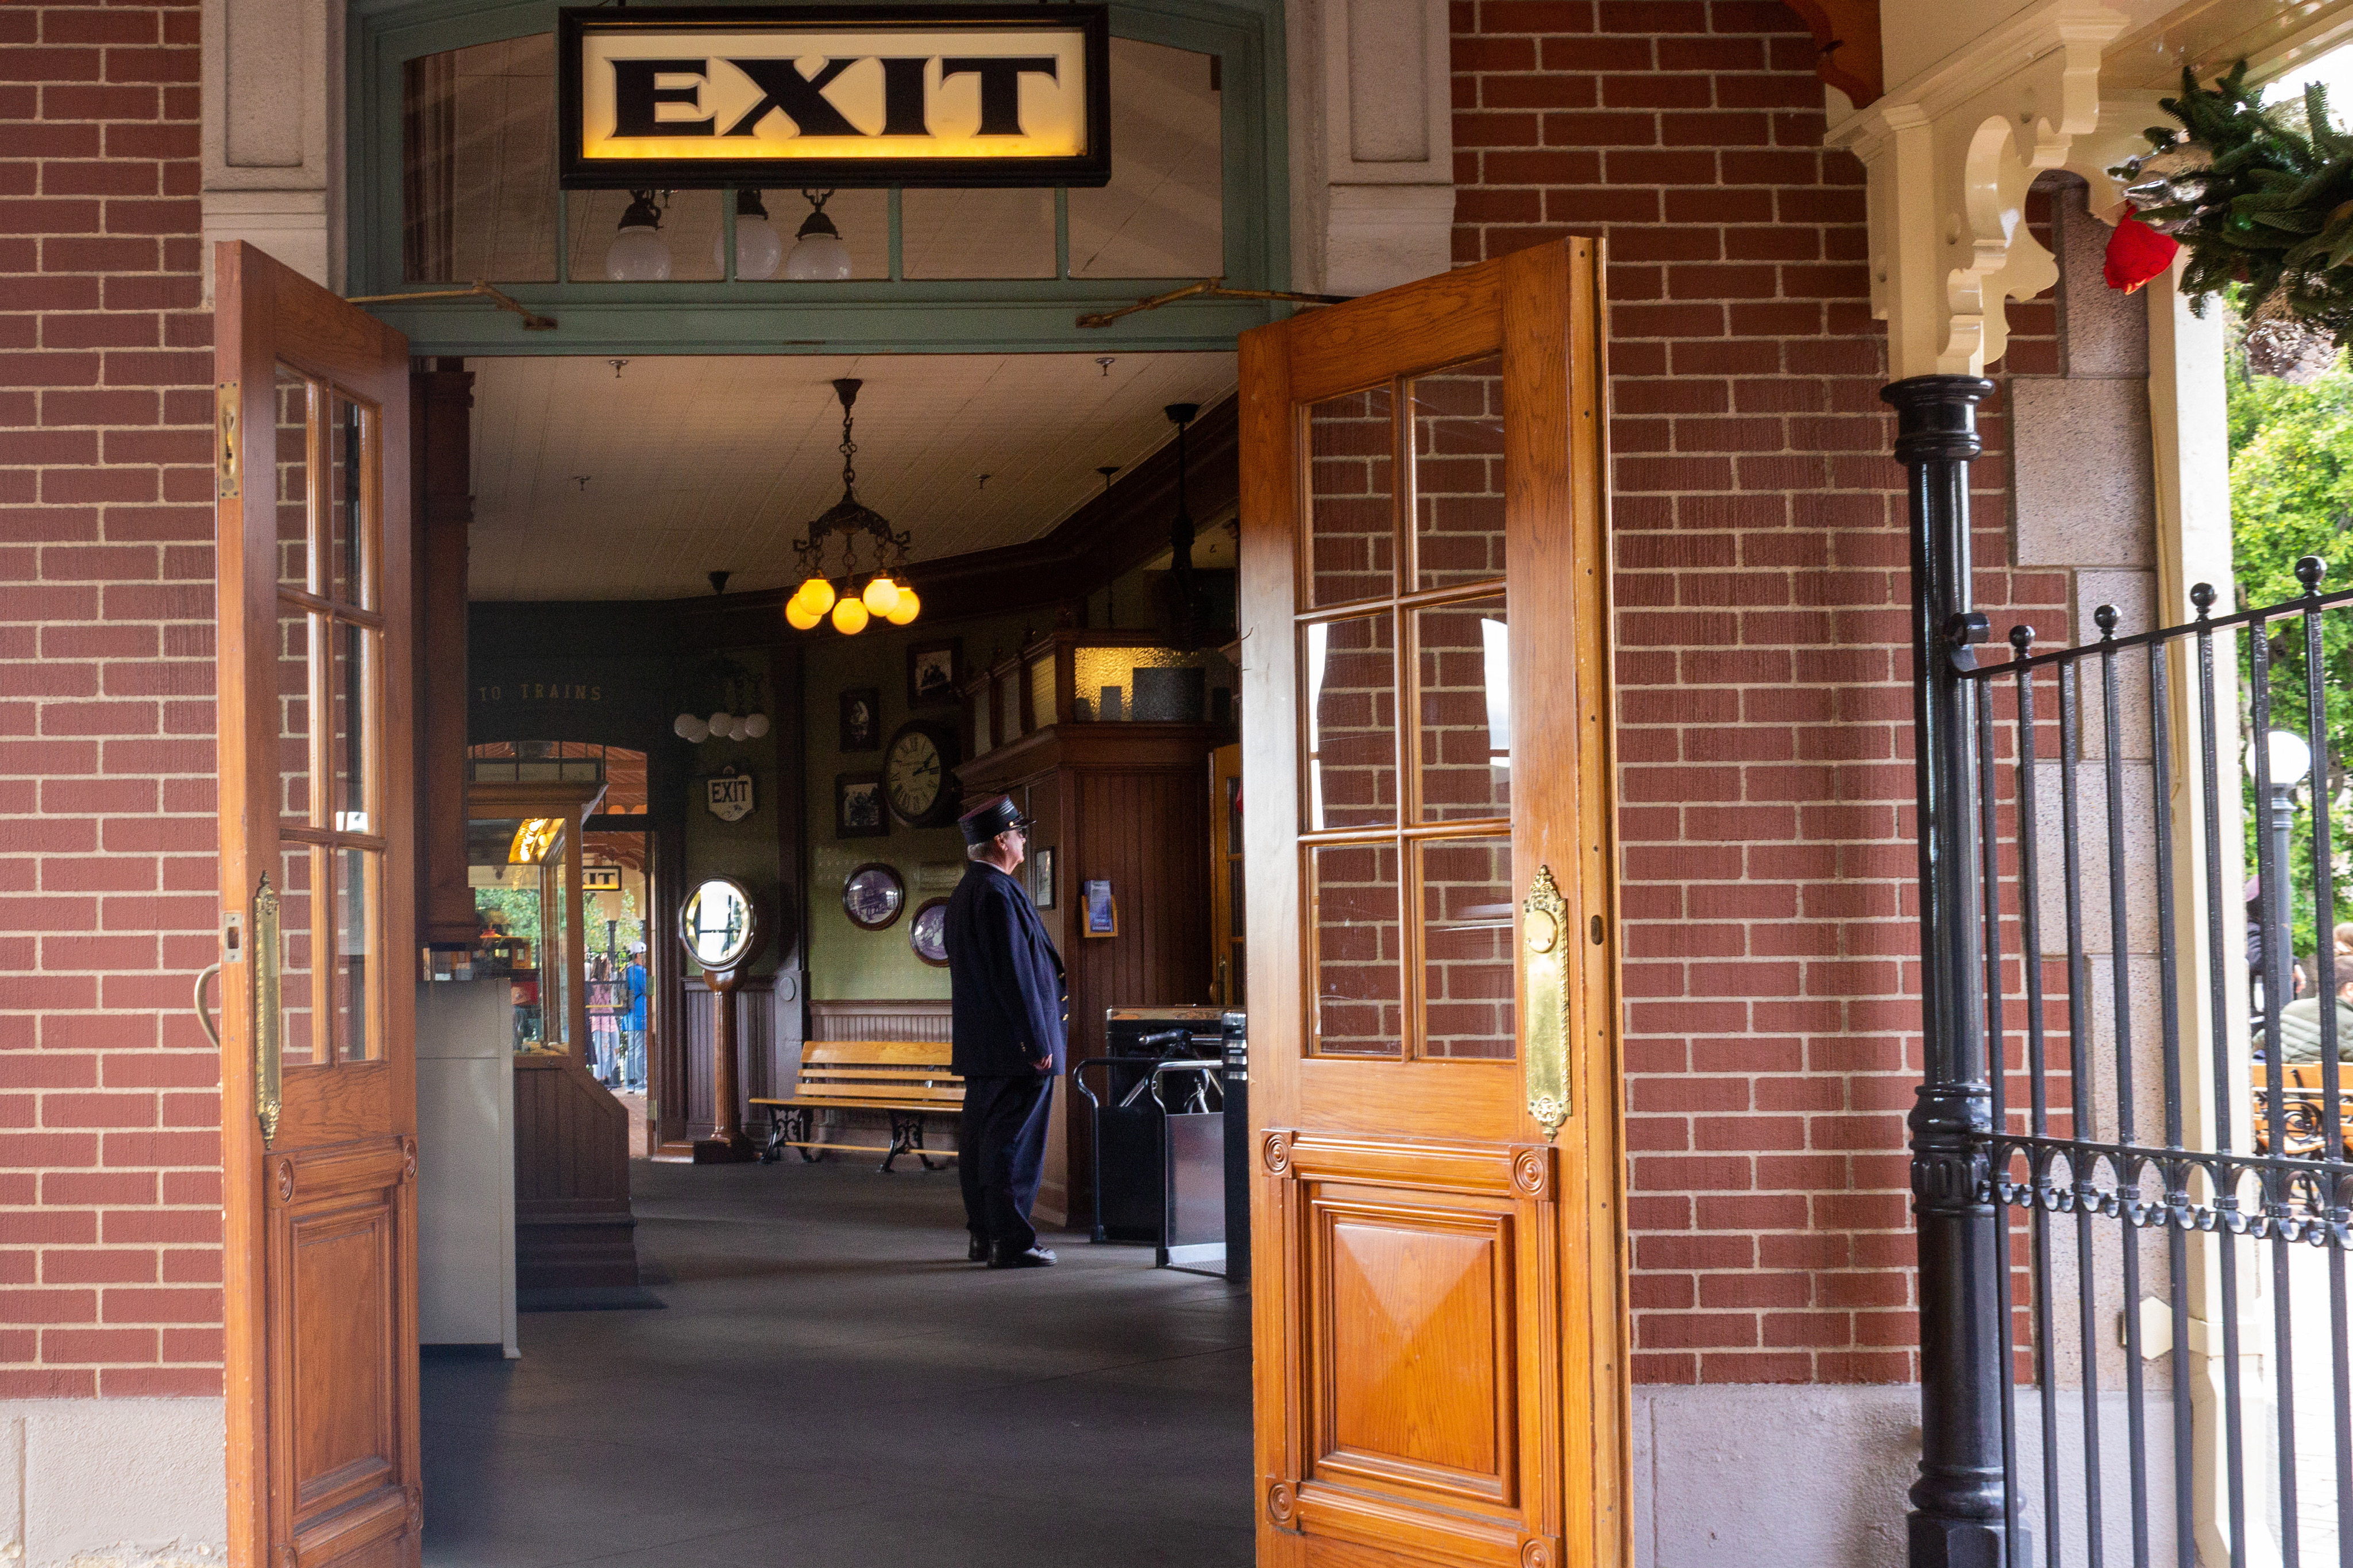 Through an open door with an exit sign, a conductor in a dark blue uniform stares ahead, waiting for a train to arrive